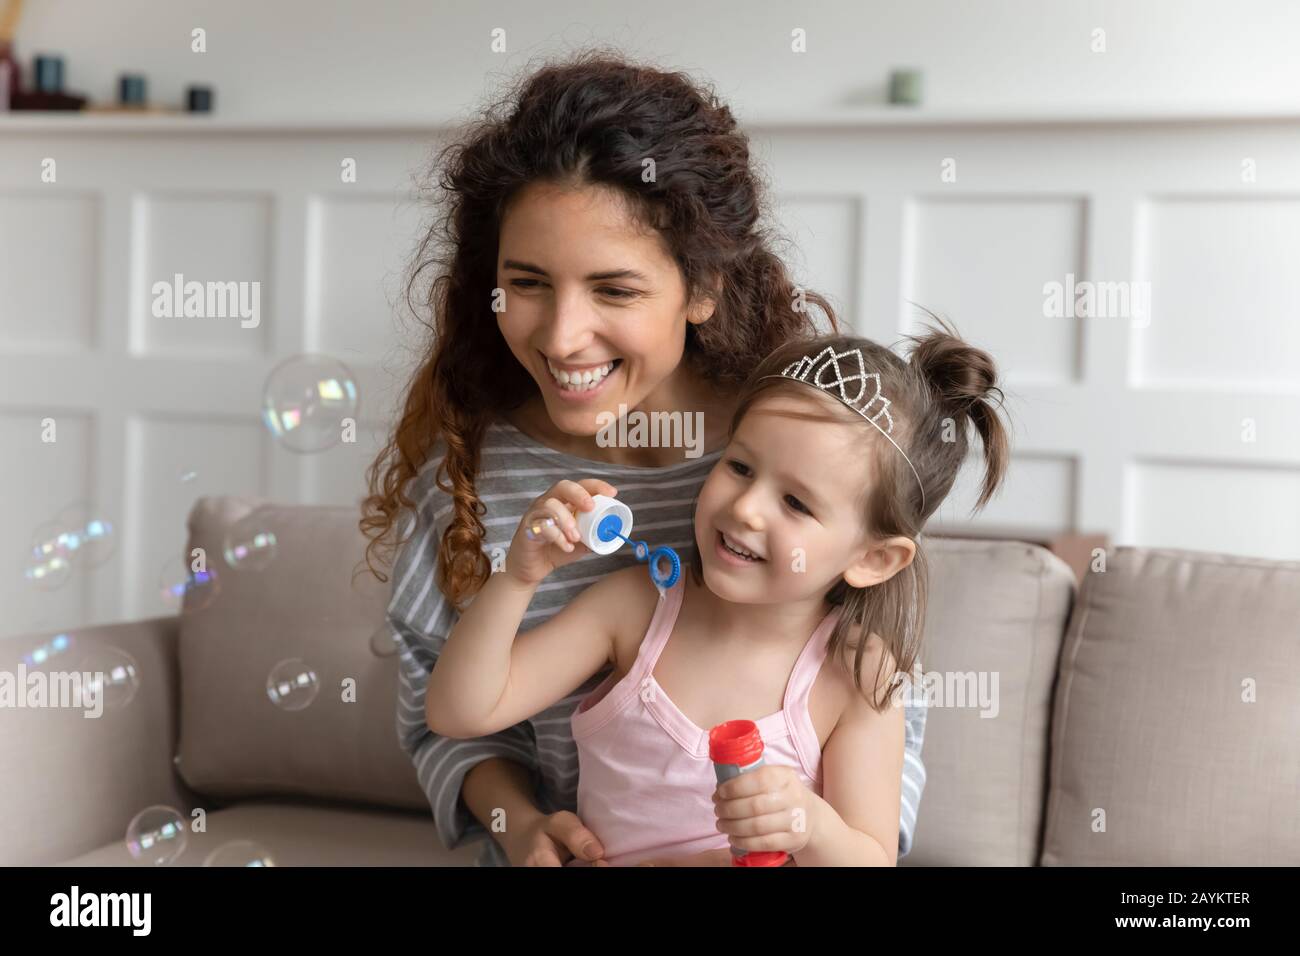 Pleasant young babysitter blowing soap bubbles with daughter. Stock Photo